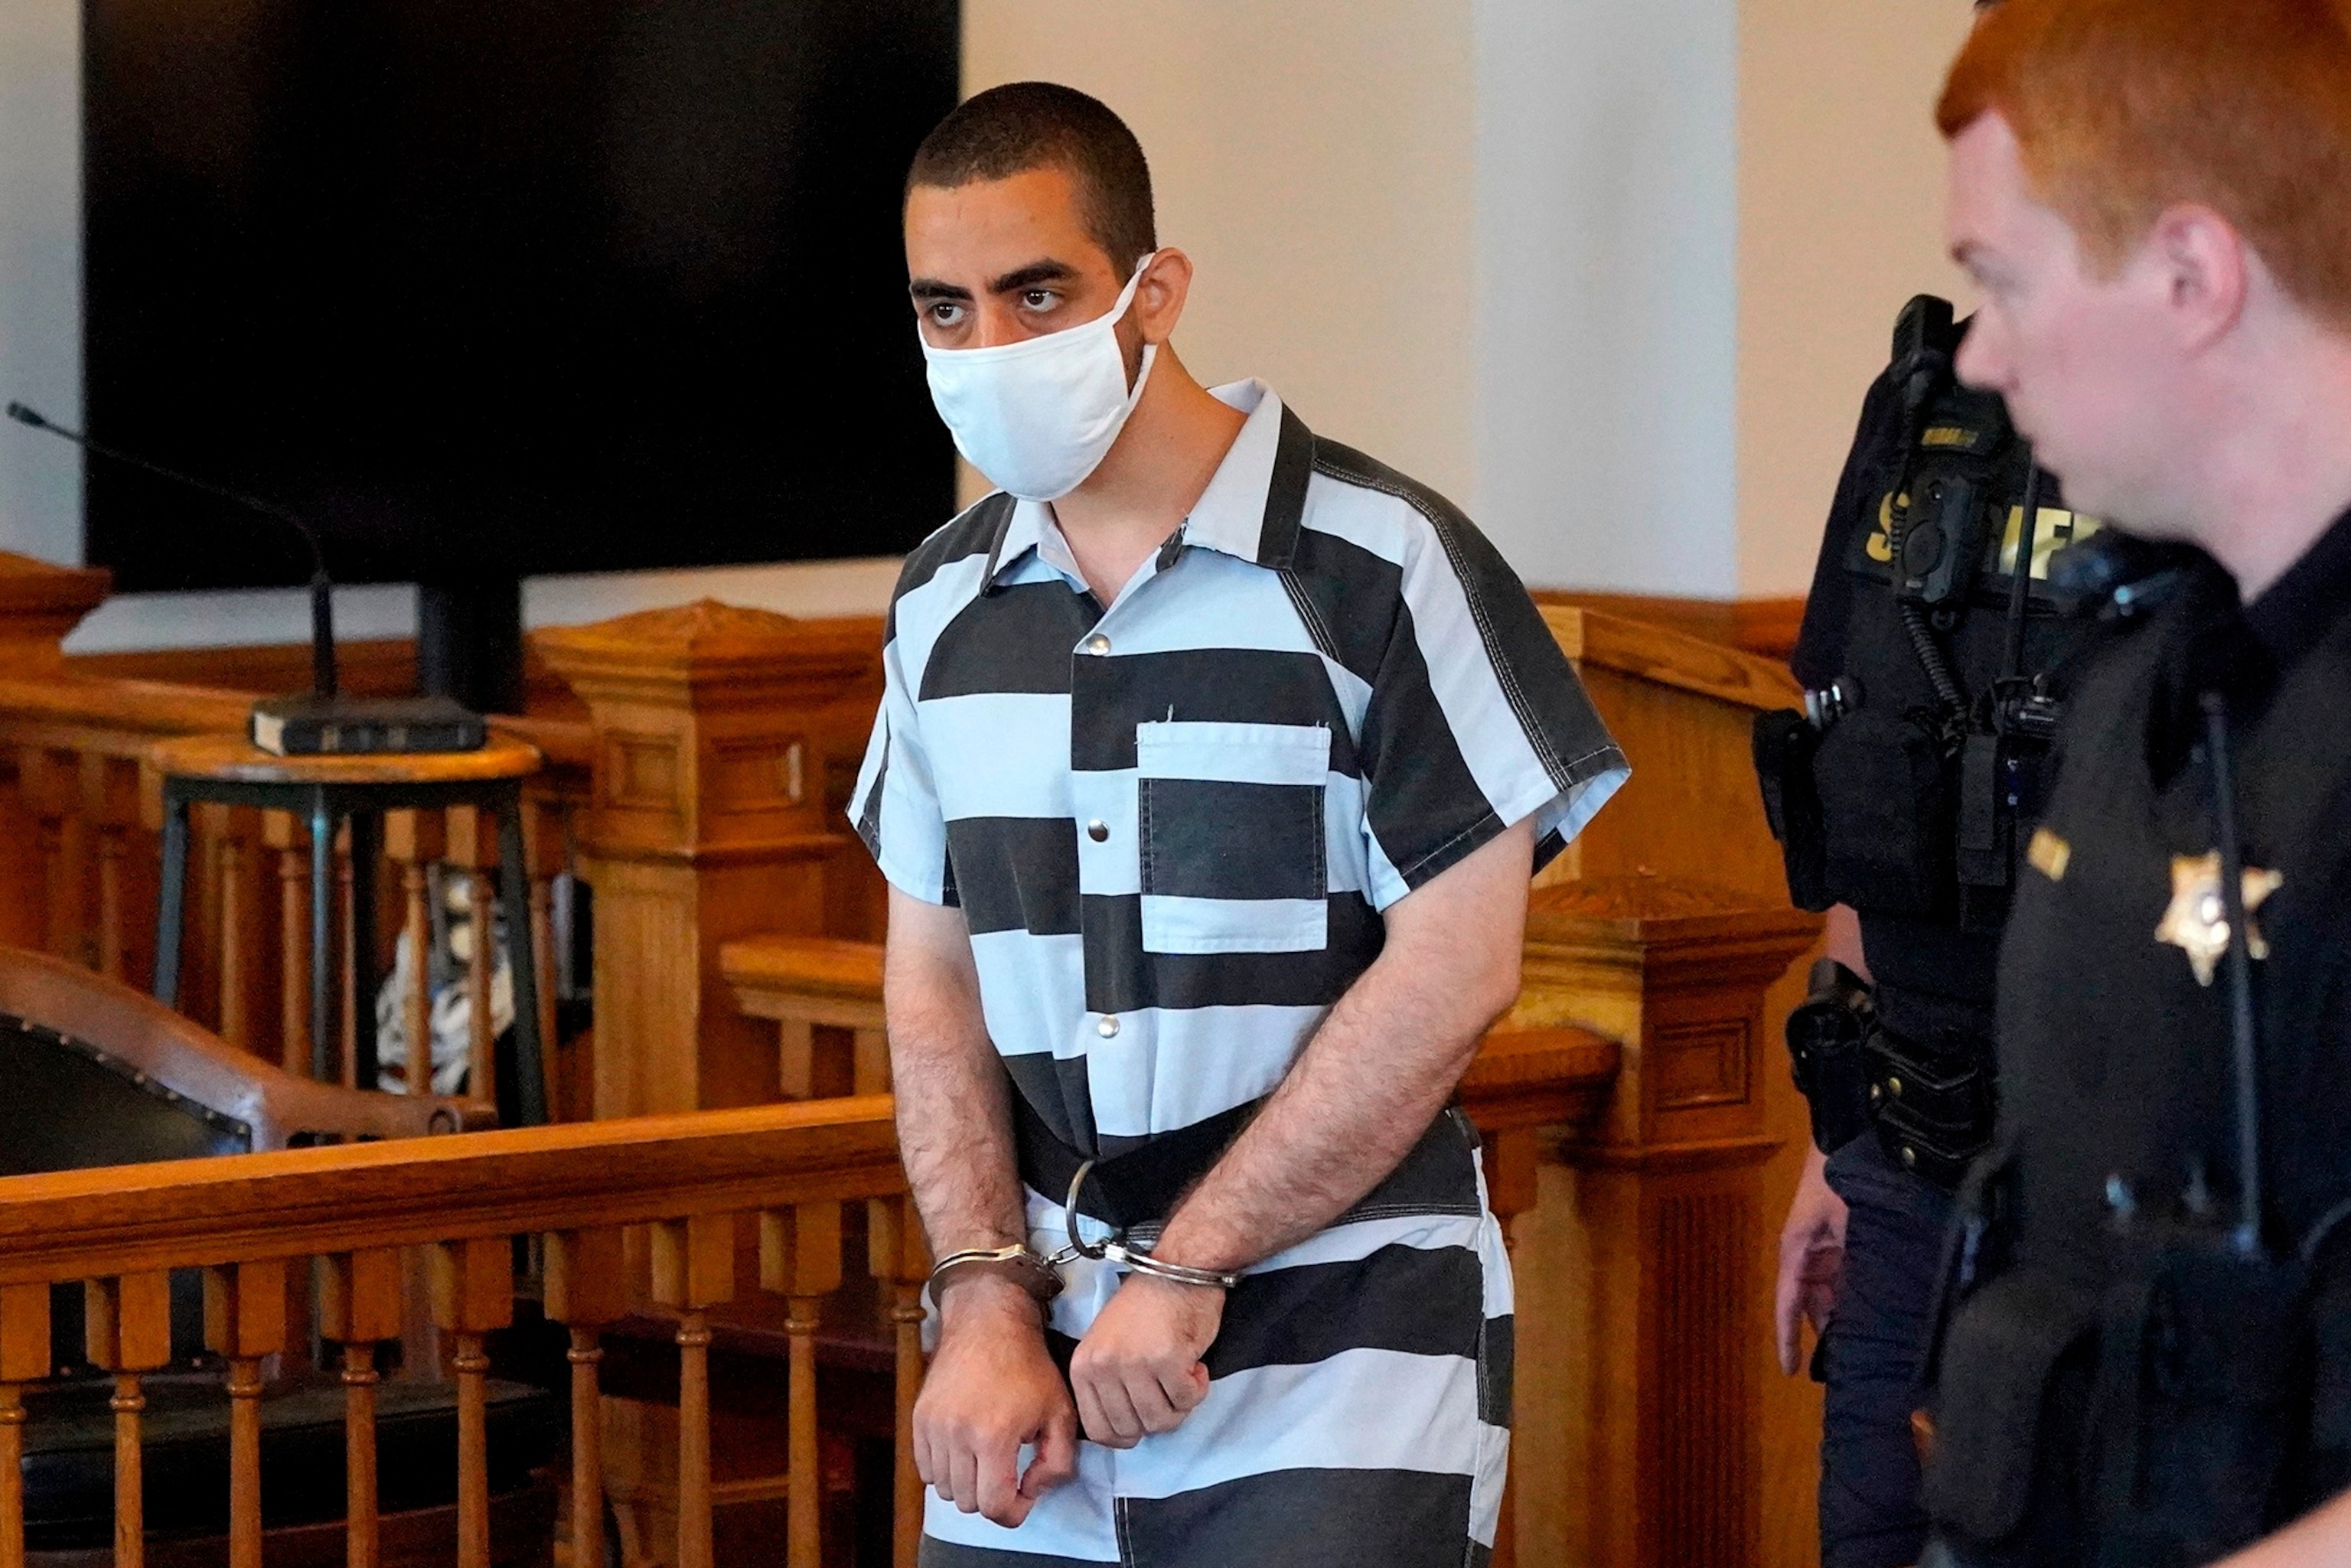 PHOTO: Hadi Matar, the man charged with stabbing author Salman Rushdie, arrives for an arraignment at the Chautauqua County Courthouse, Aug. 13, 2022, in Mayville, N.Y. 